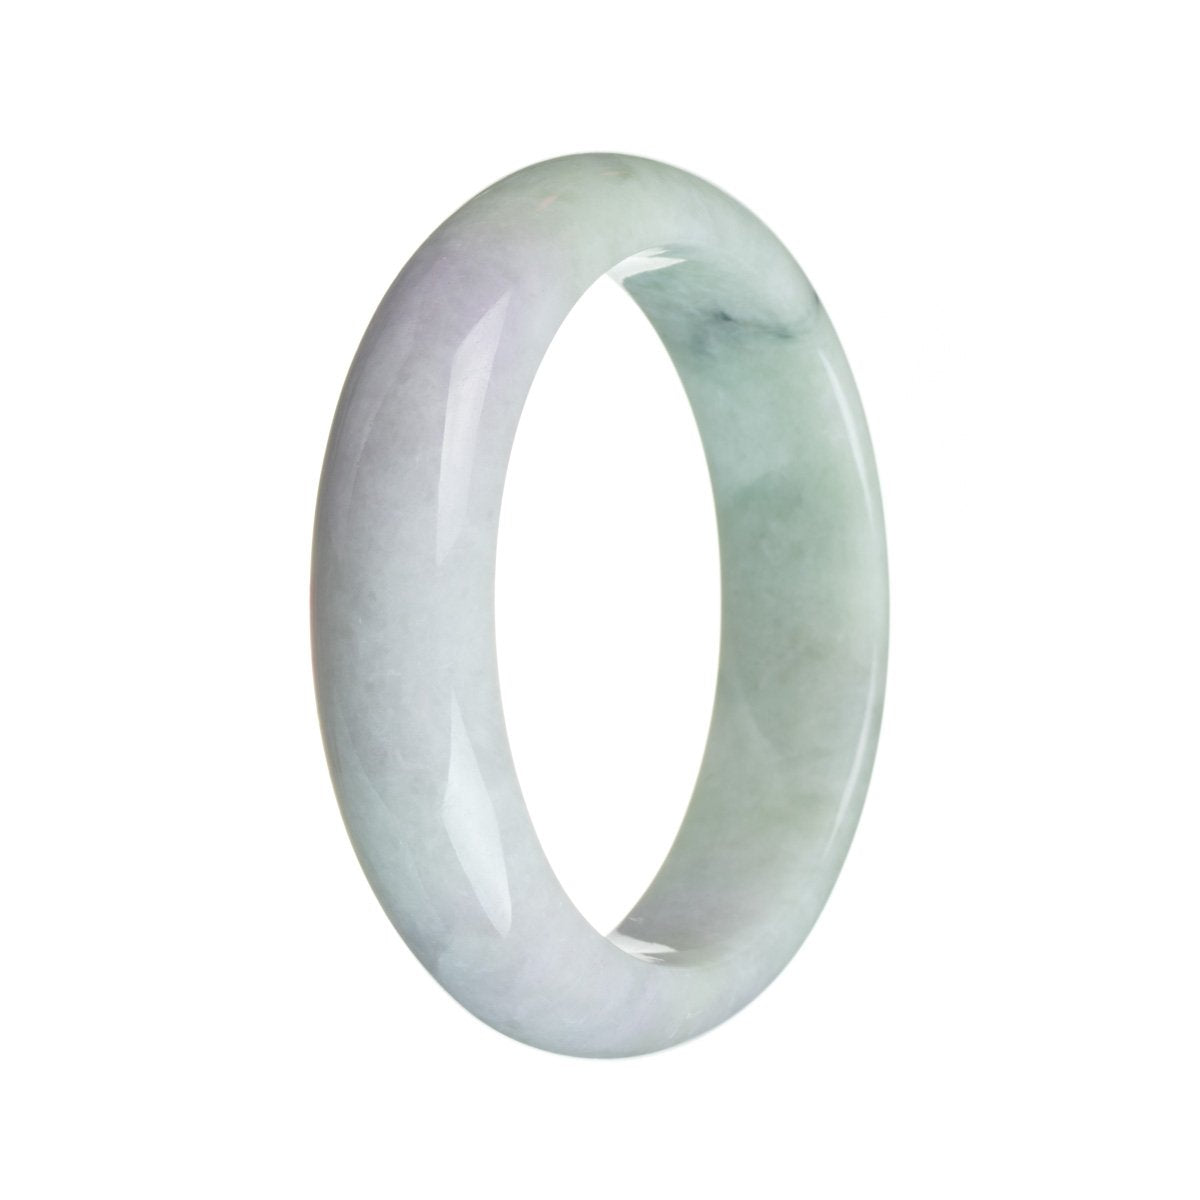 A half moon-shaped bracelet made of genuine Grade A light lavender and green Jadeite Jade, crafted by MAYS GEMS.